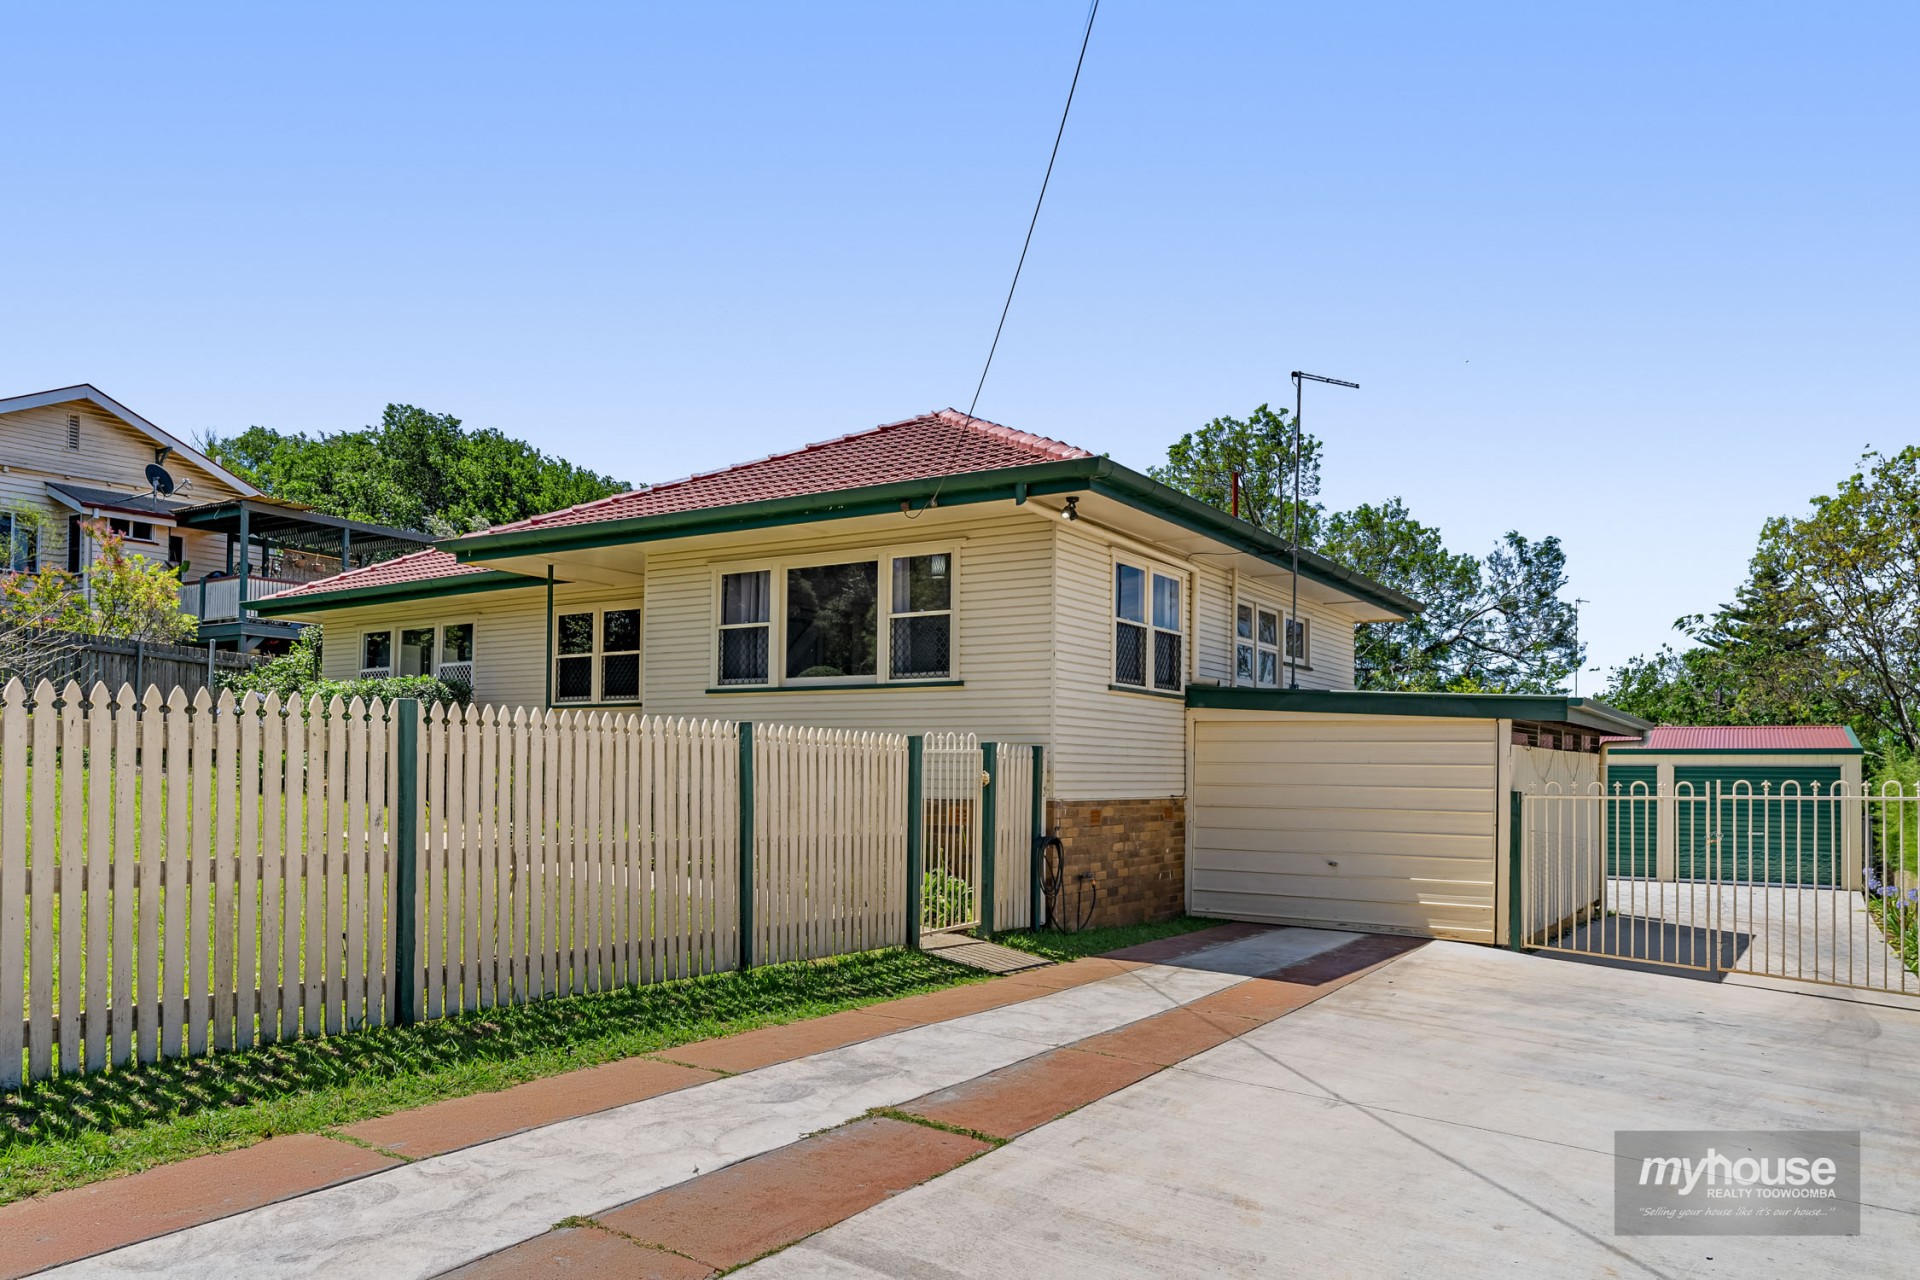 Property Sold in South Toowoomba